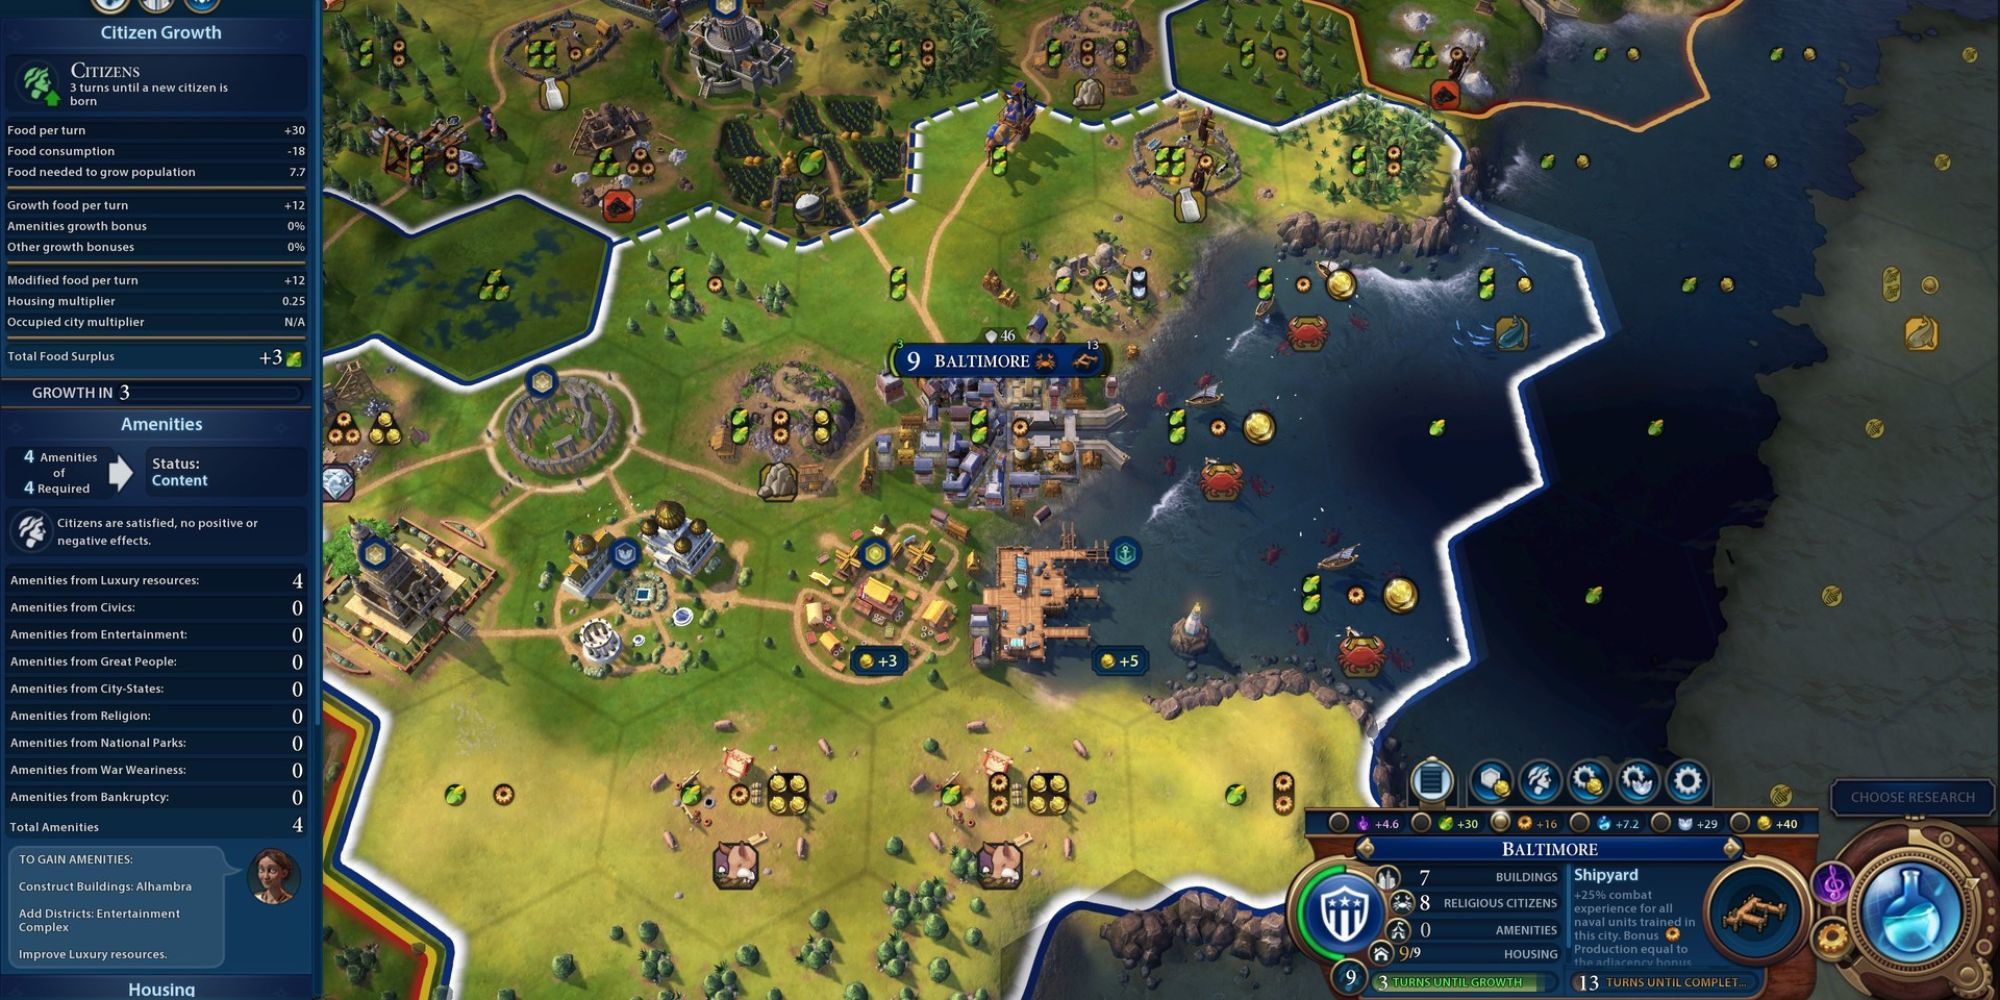 A player looking at the city of Baltimore in Sid Meier's Civilization 6